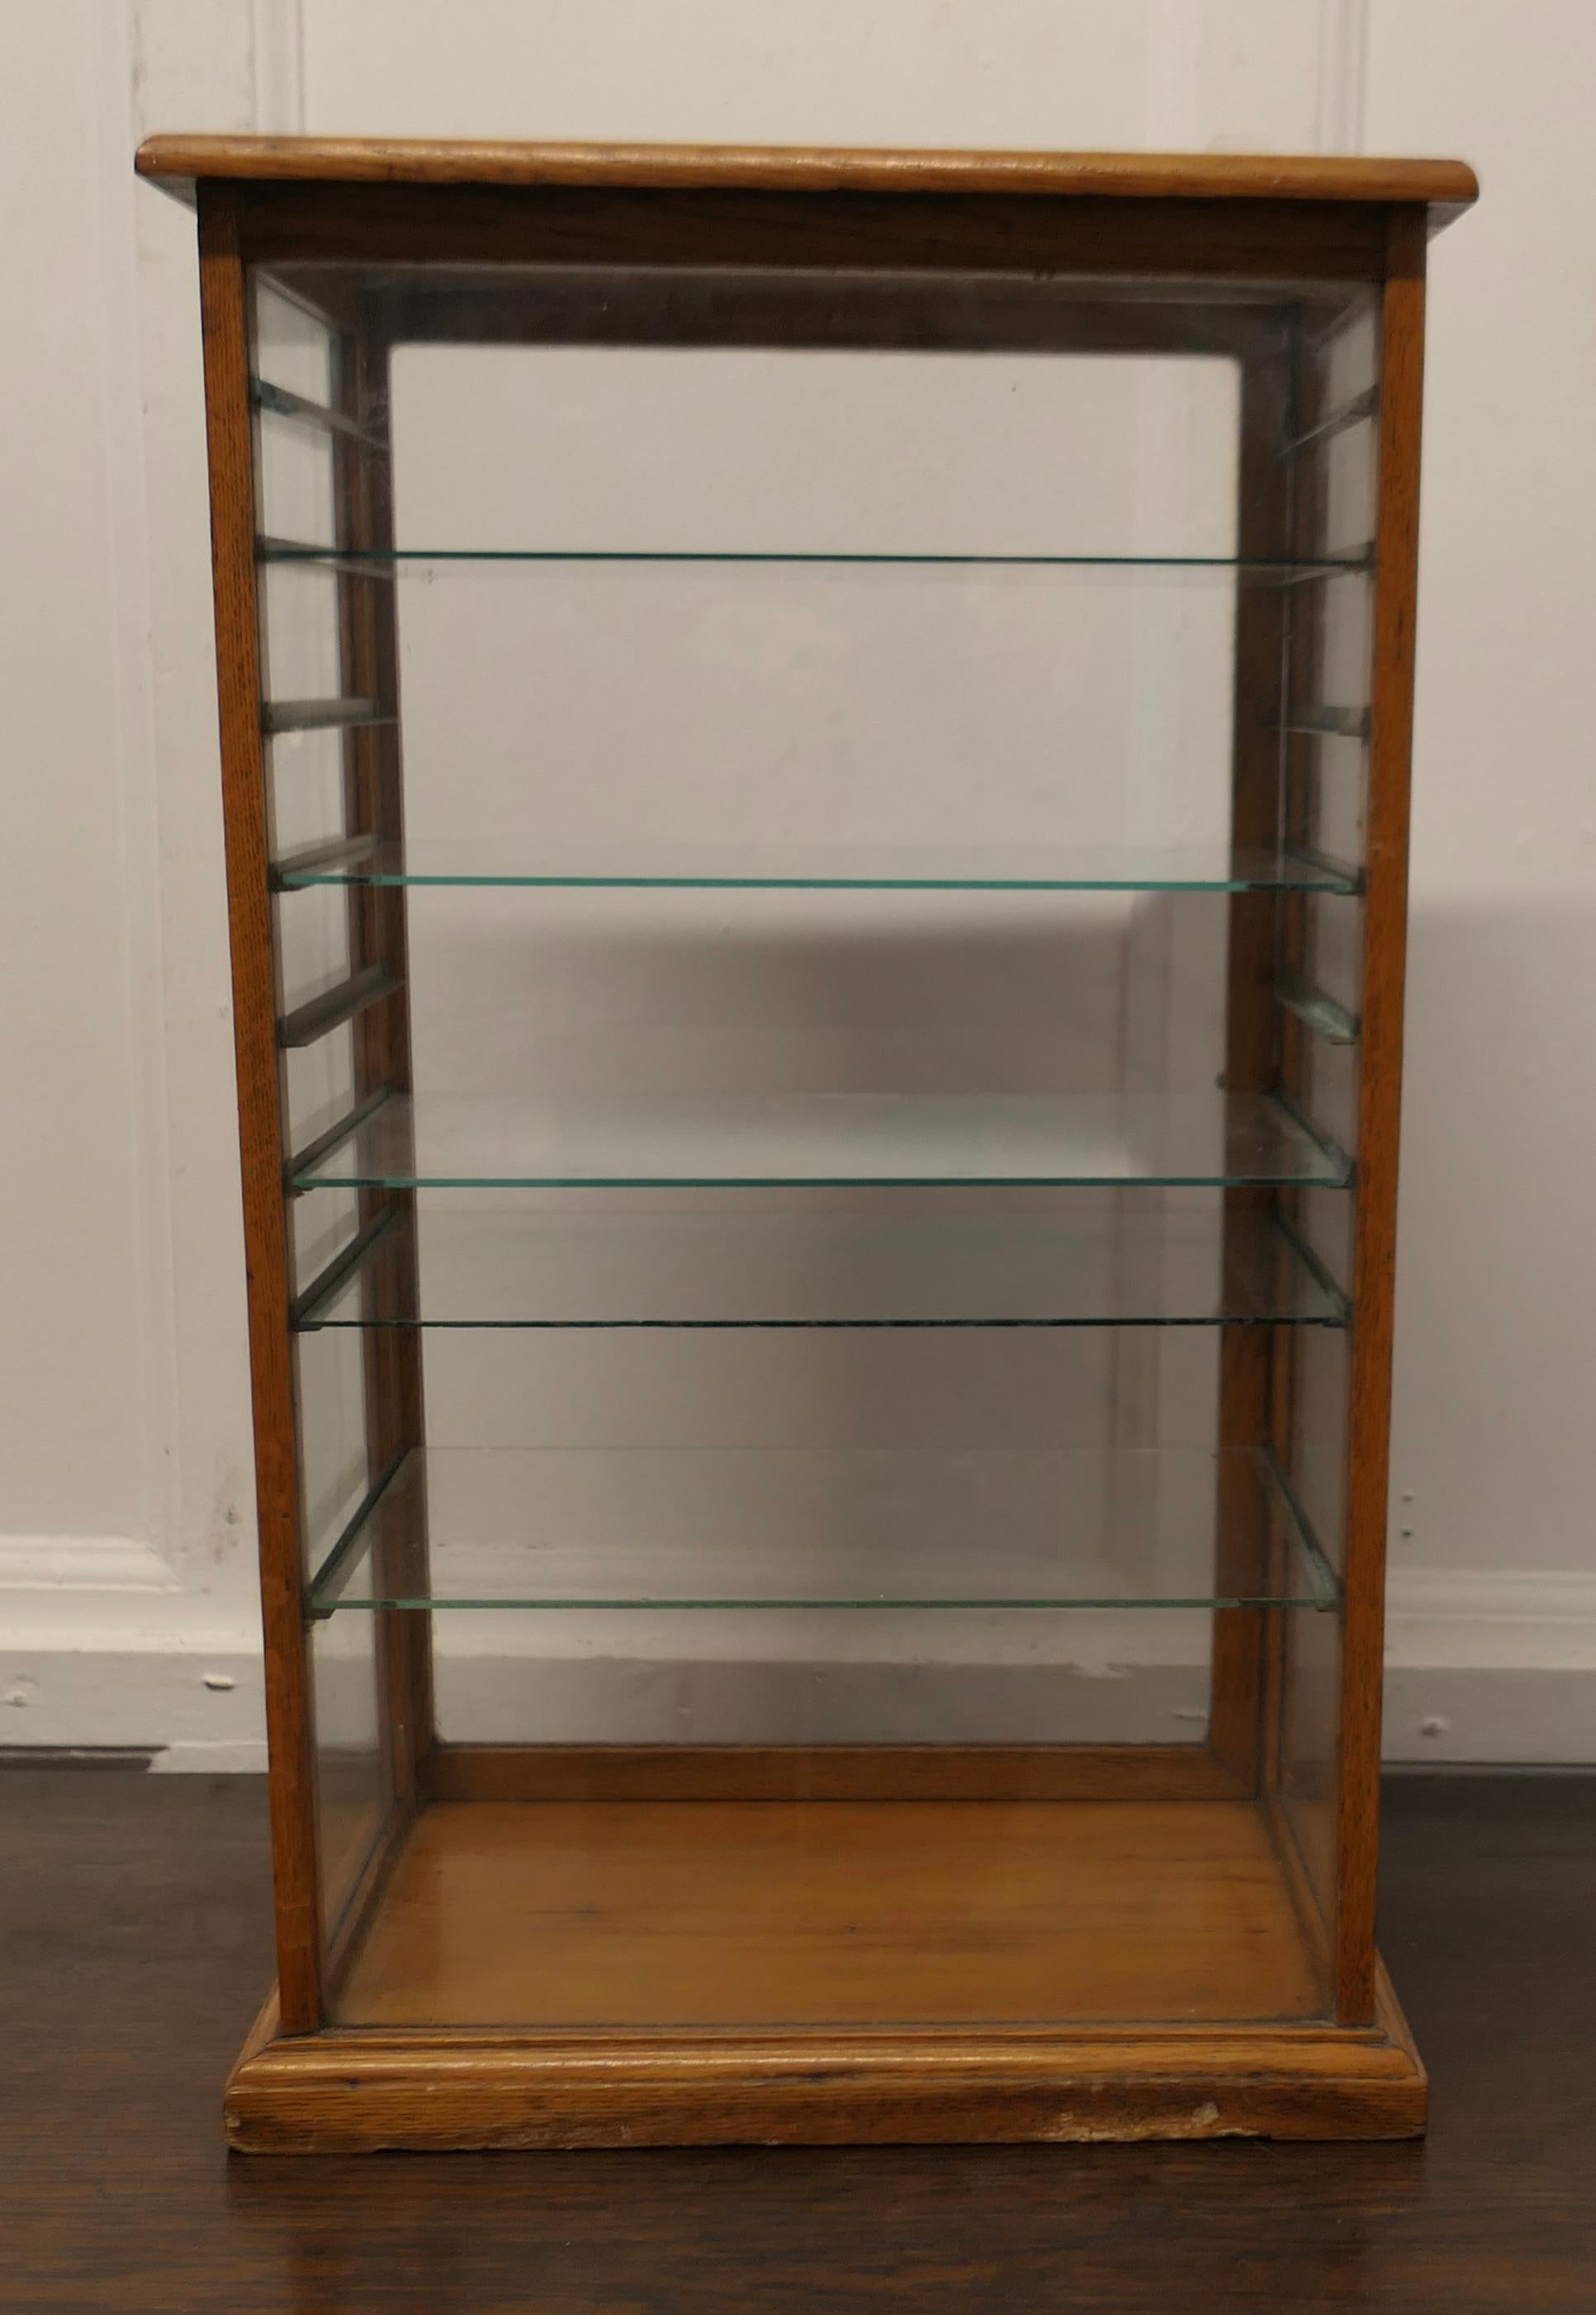 Arts and Crafts Counter Top Shop Display Cabinet, Watches, Jewellery


This is a Golden Oak fully glazed Shop Display Cabinet it has a glass door at the back and 5 adjustable glass shelves to the interior, the door has a working latch at the